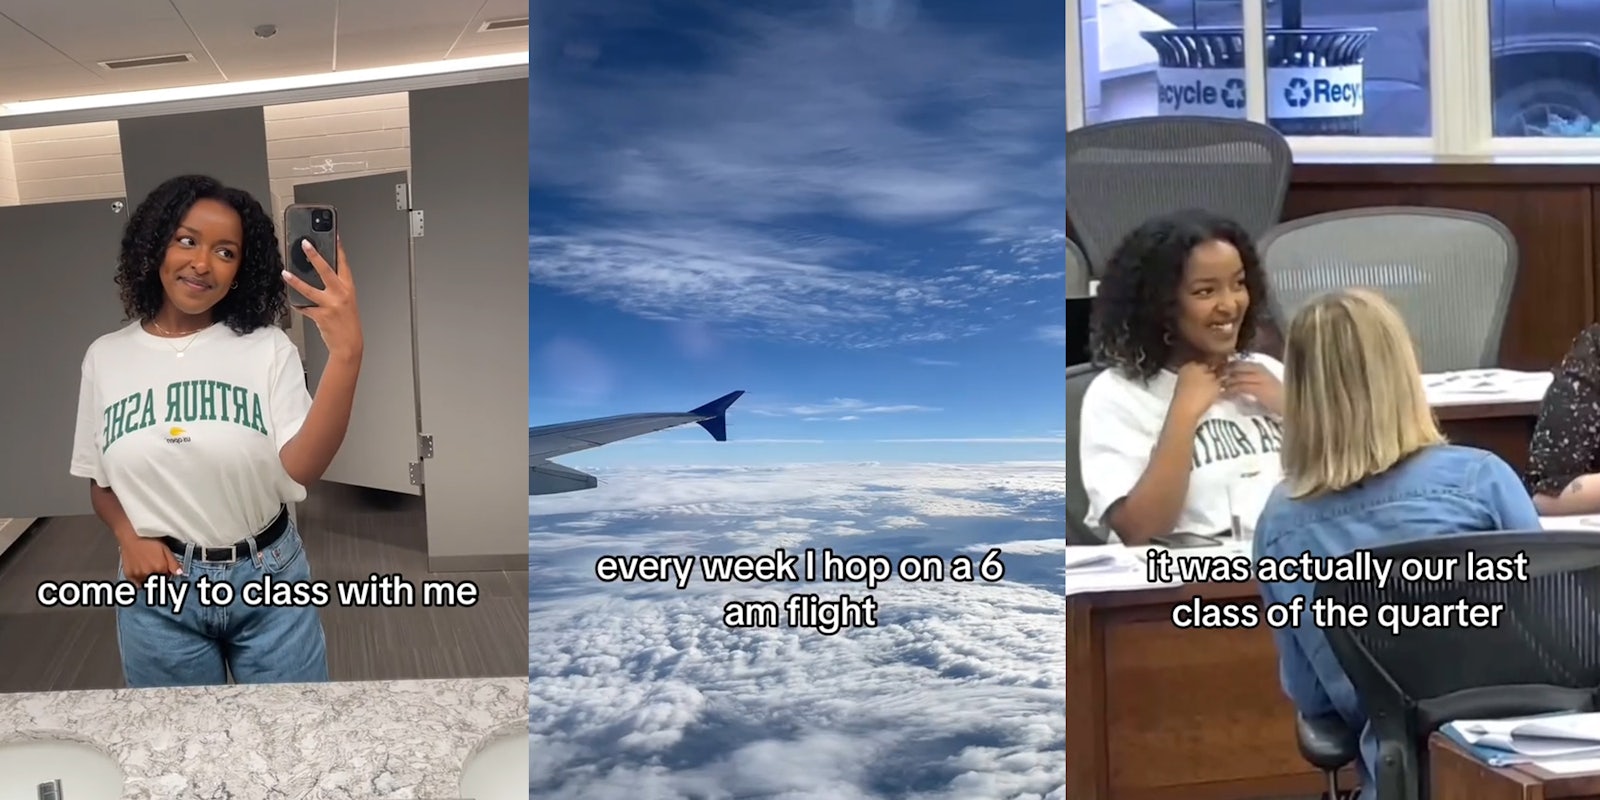 College student says she flies from New York to Chicago every week for class